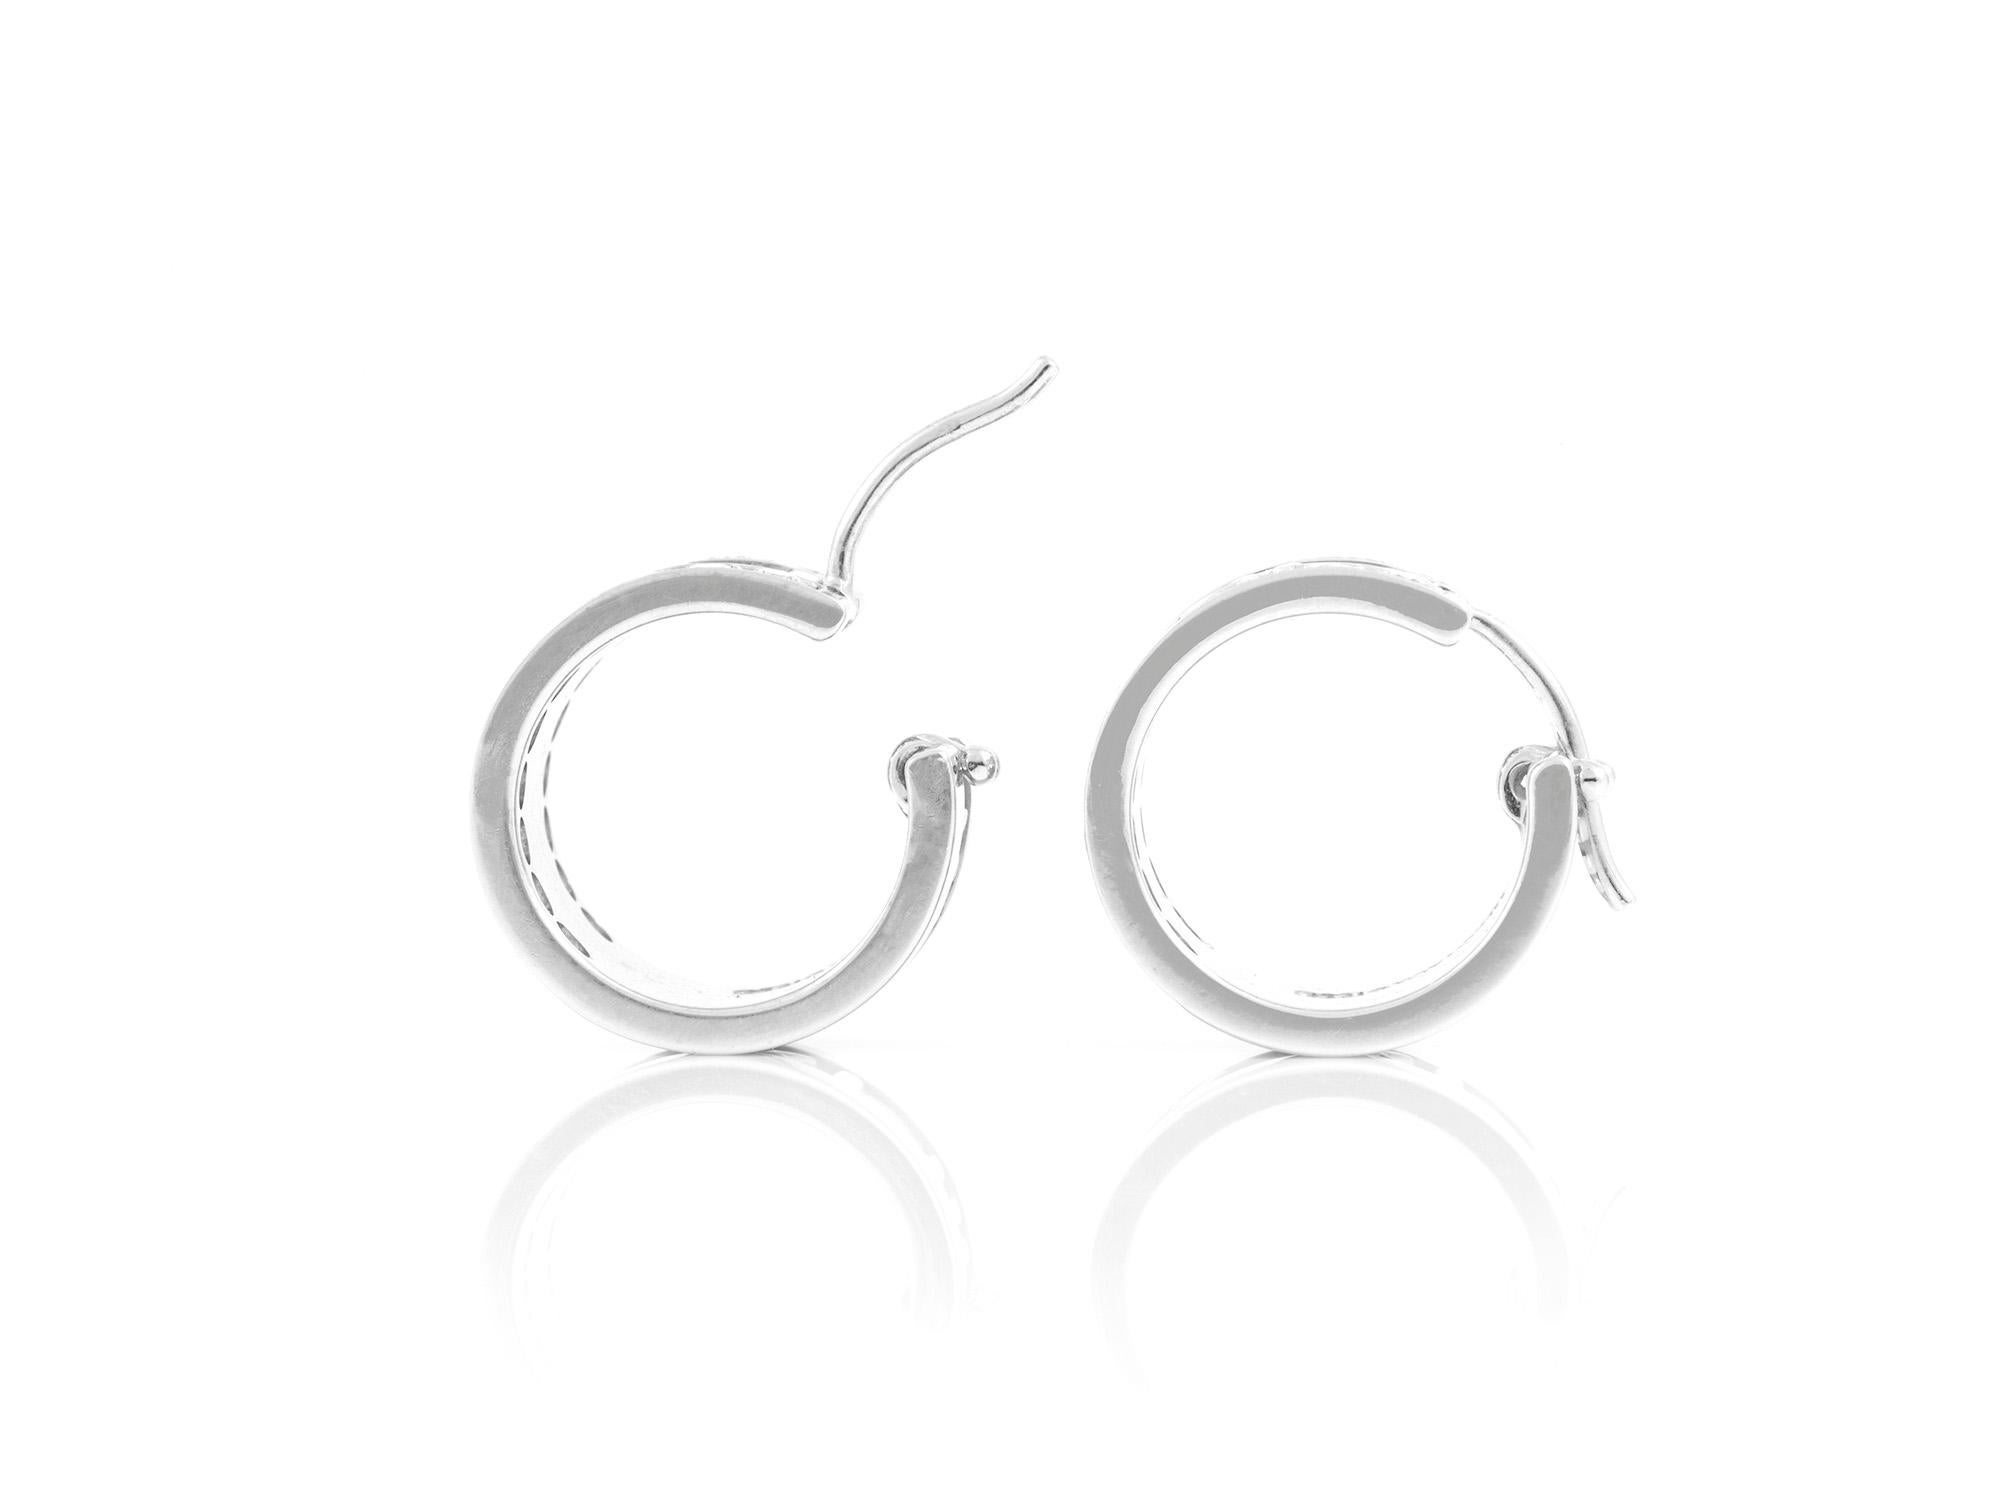 Tiffany & Co. Atlas earrings with diamonds finely crafted in 18k white gold. 